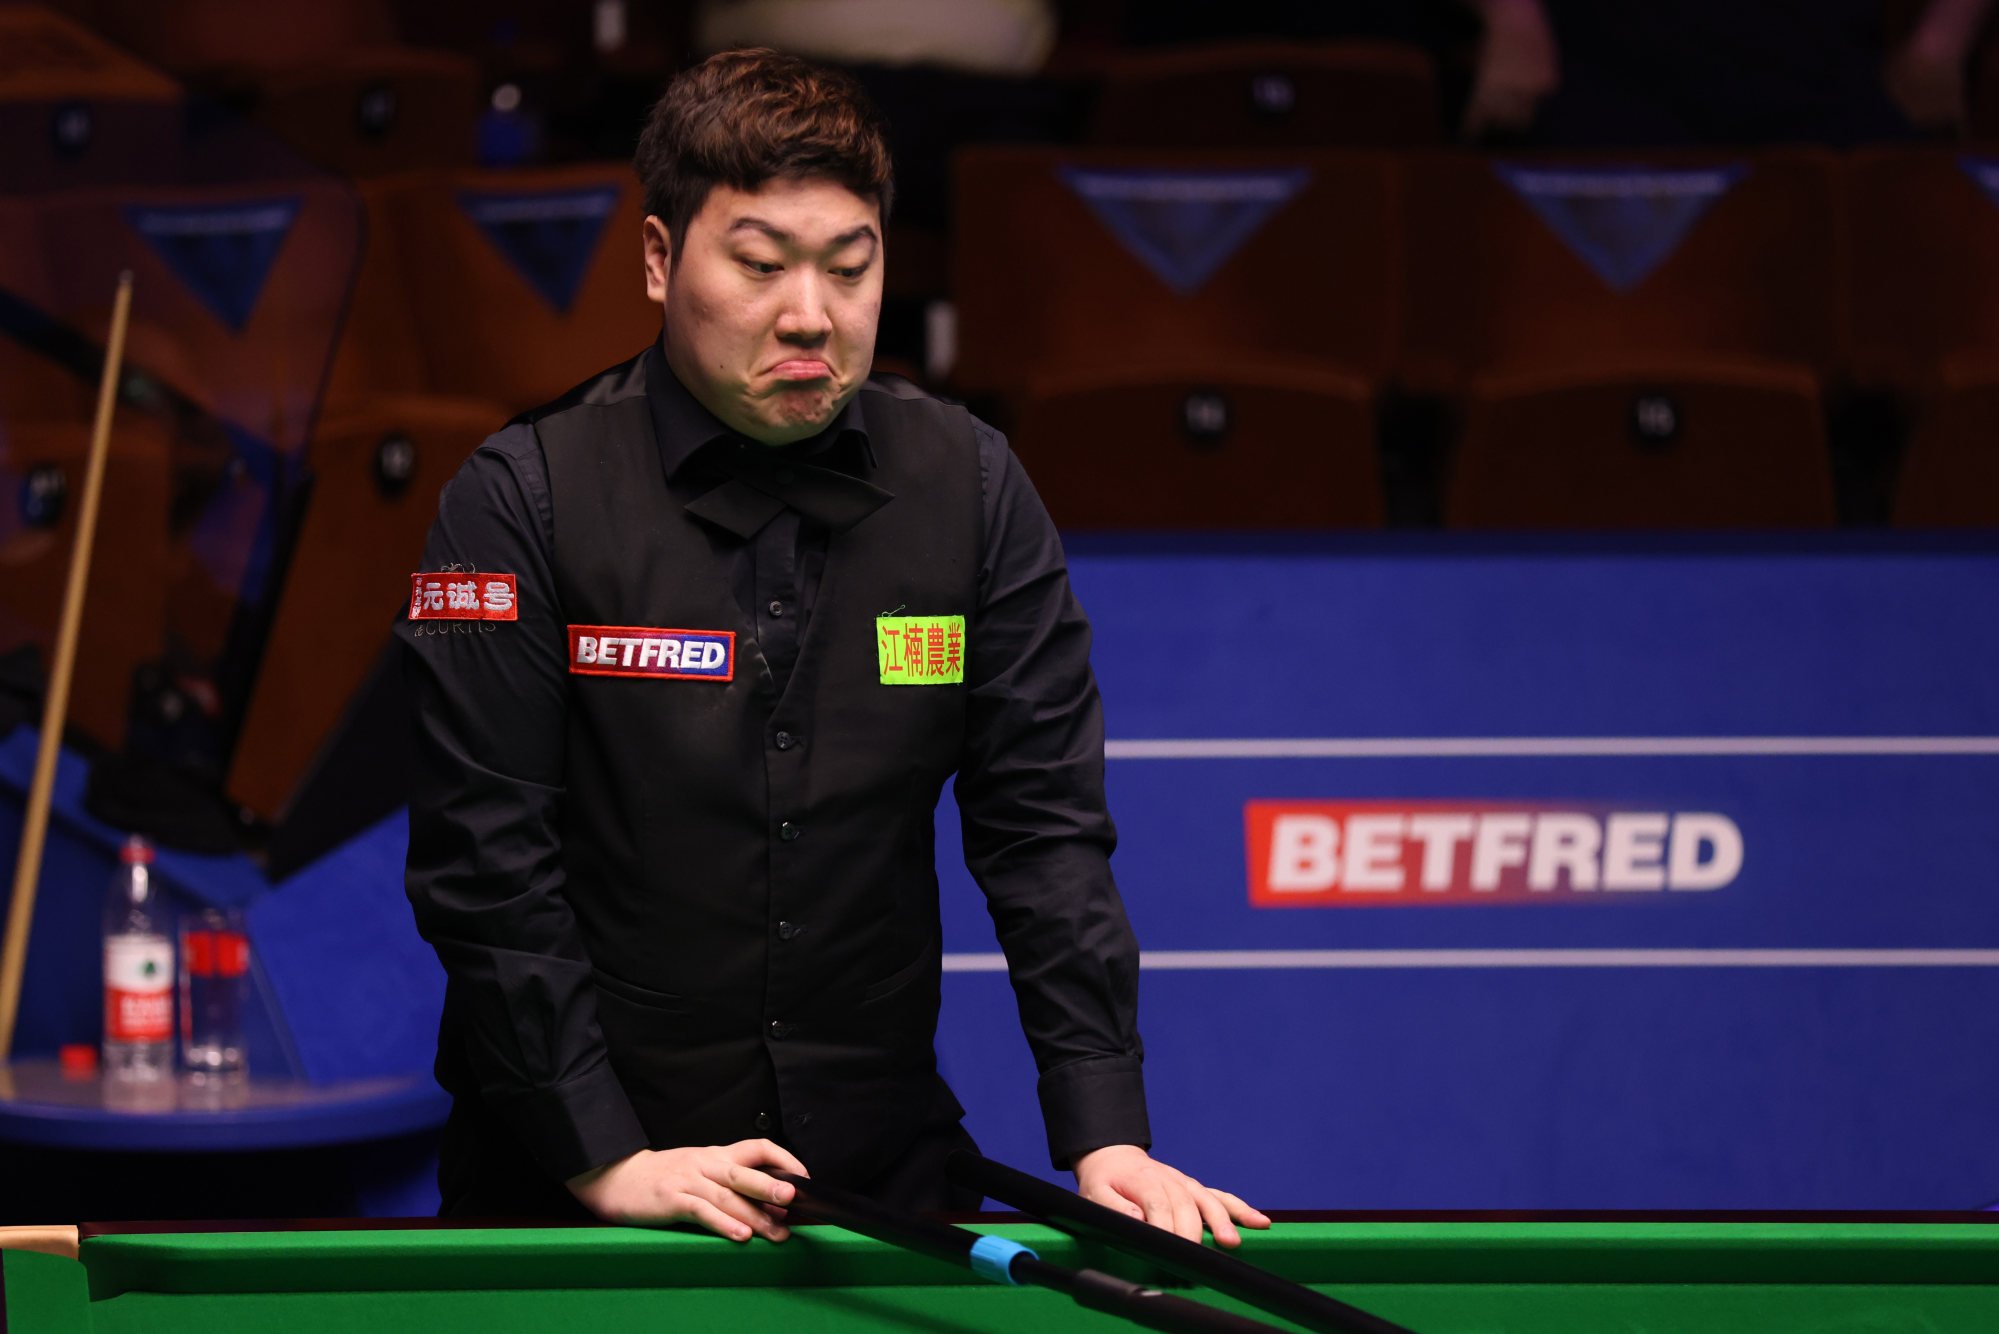 Snooker boss heartbroken as 10 Chinese players face lifetime bans for match-fixing charges South China Morning Post